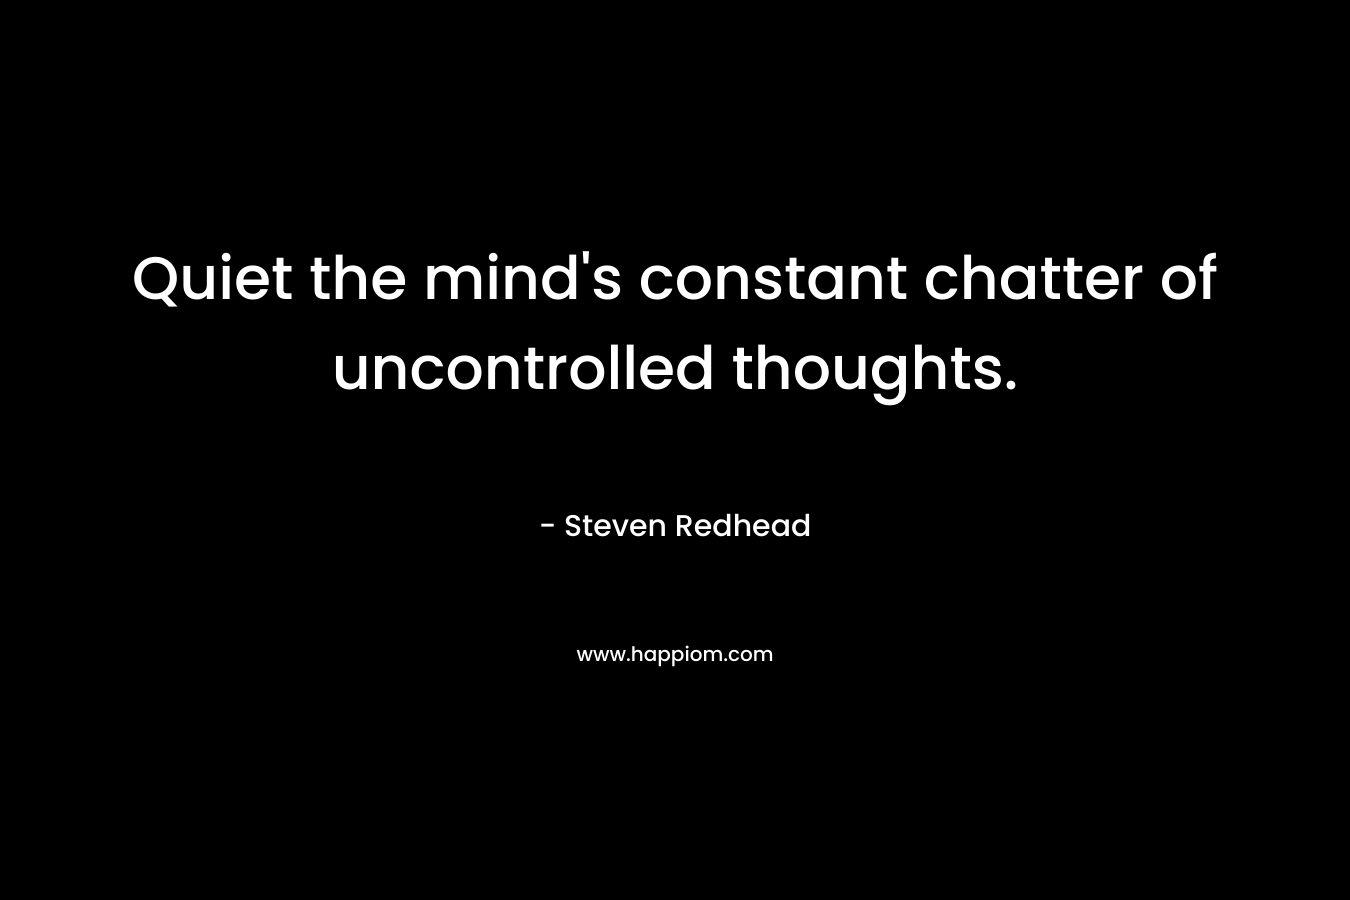 Quiet the mind's constant chatter of uncontrolled thoughts.